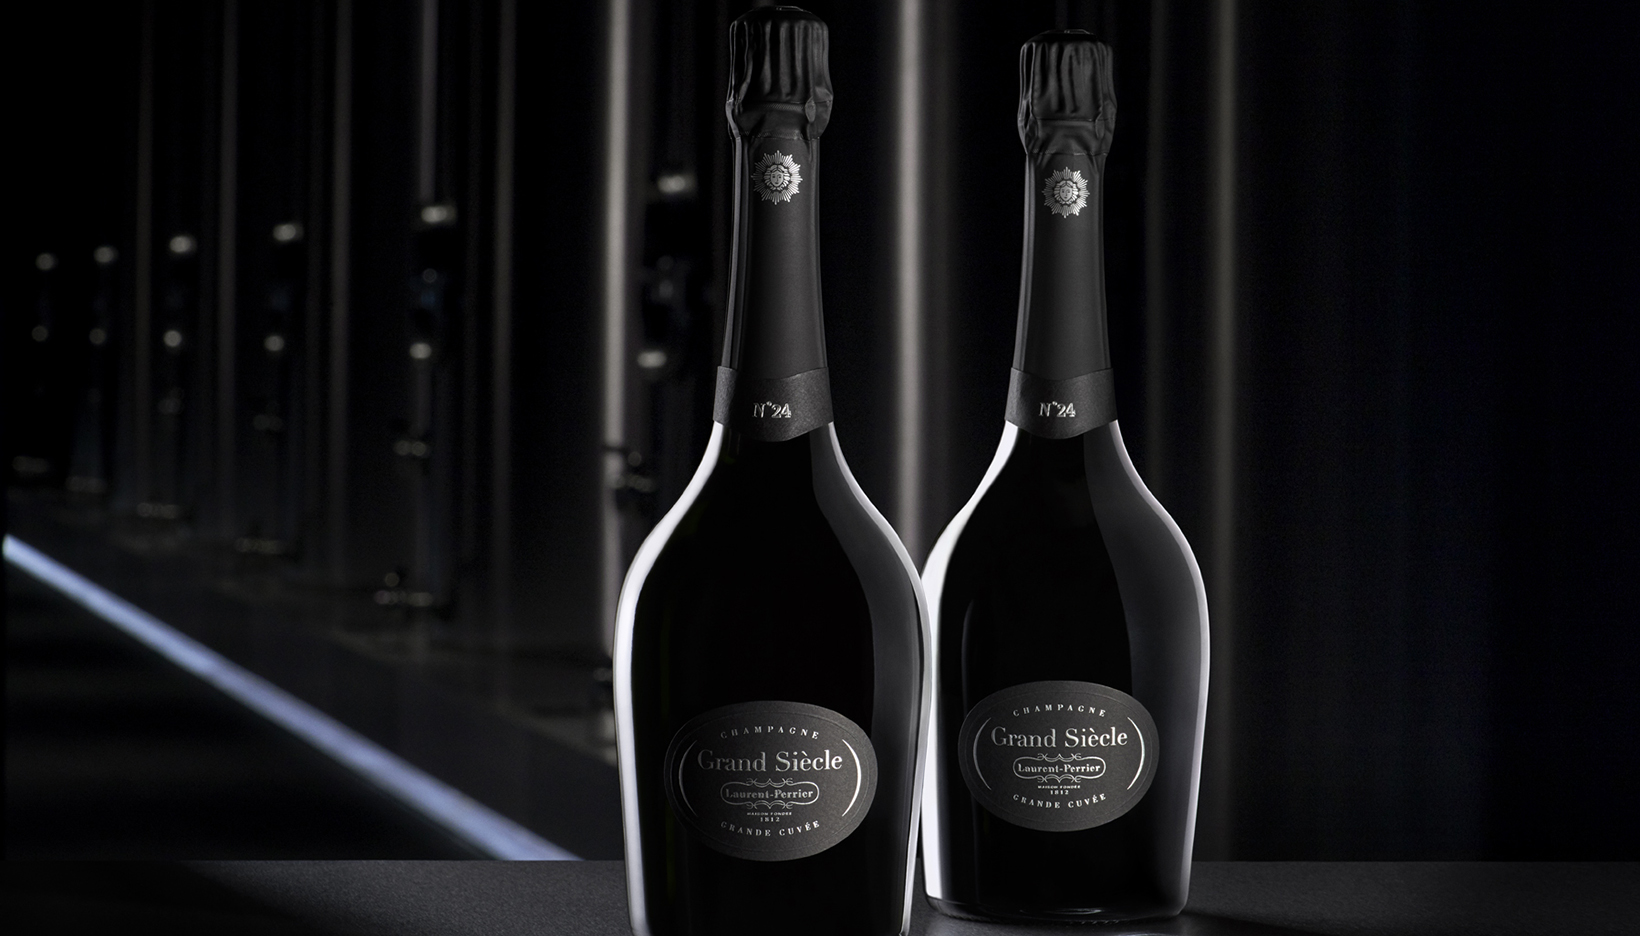 Laurent Perrier's Grand Siècle: Champagne tasting with the EHL